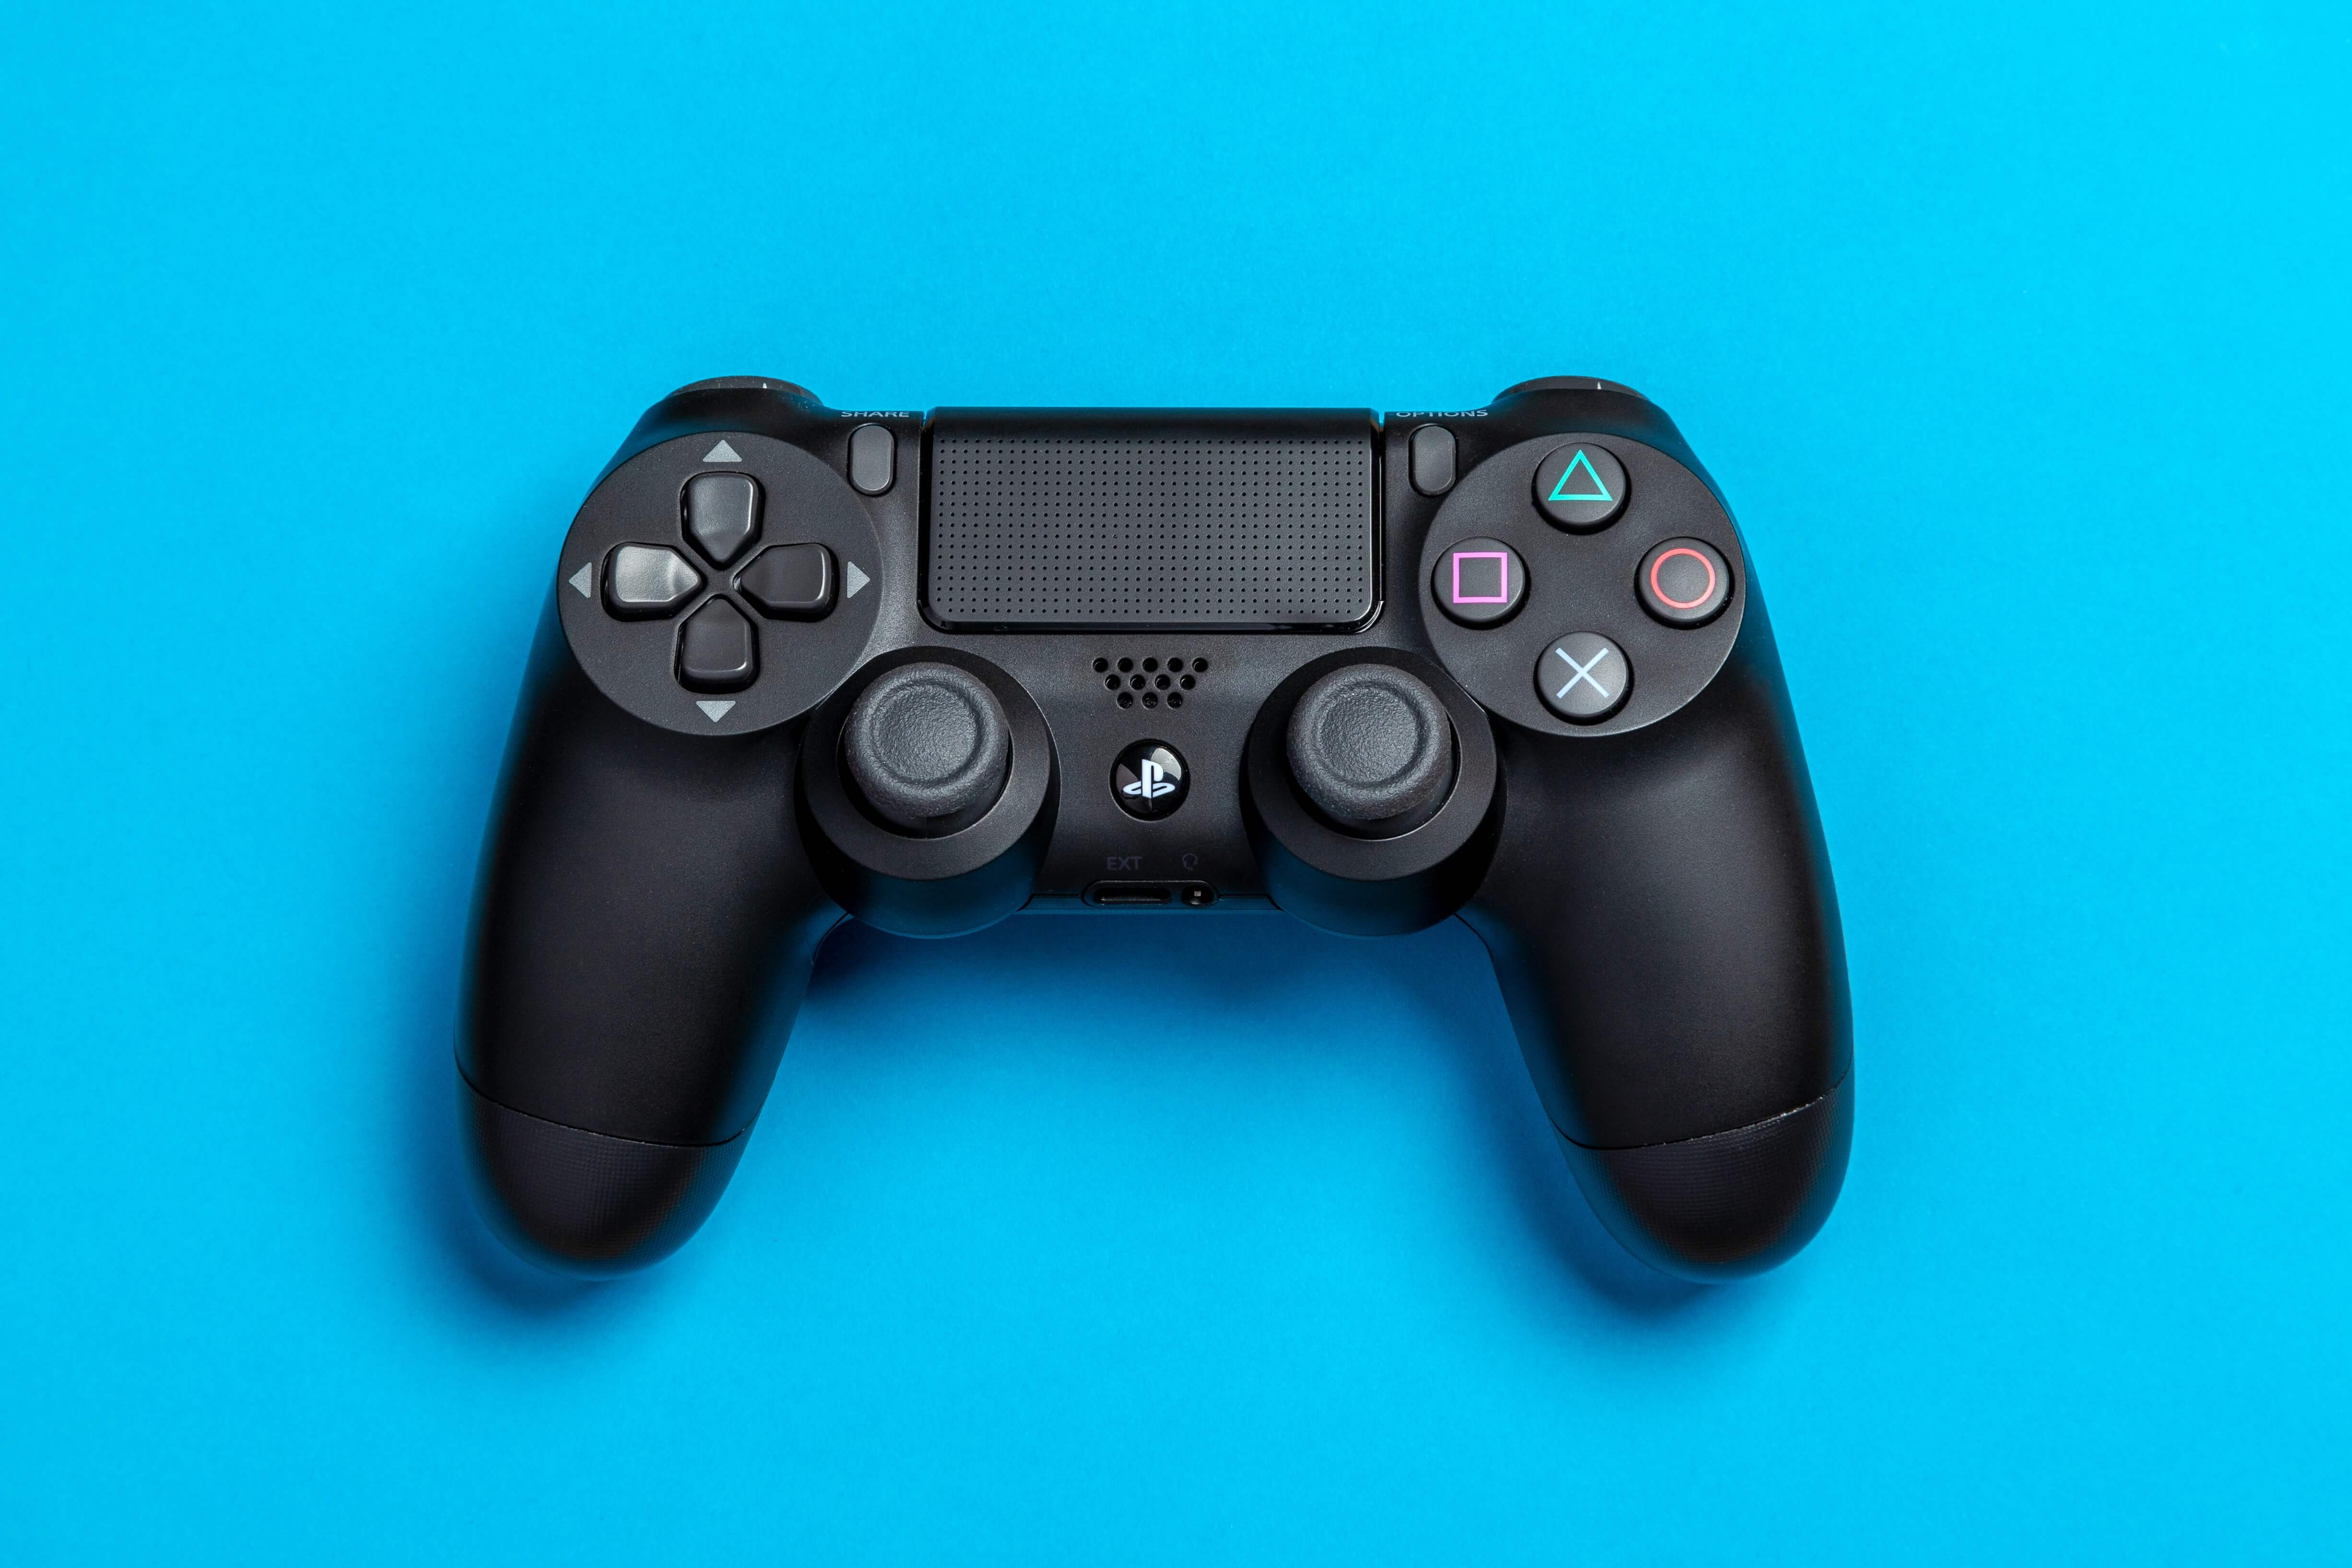 cheapest ps4 controller uk